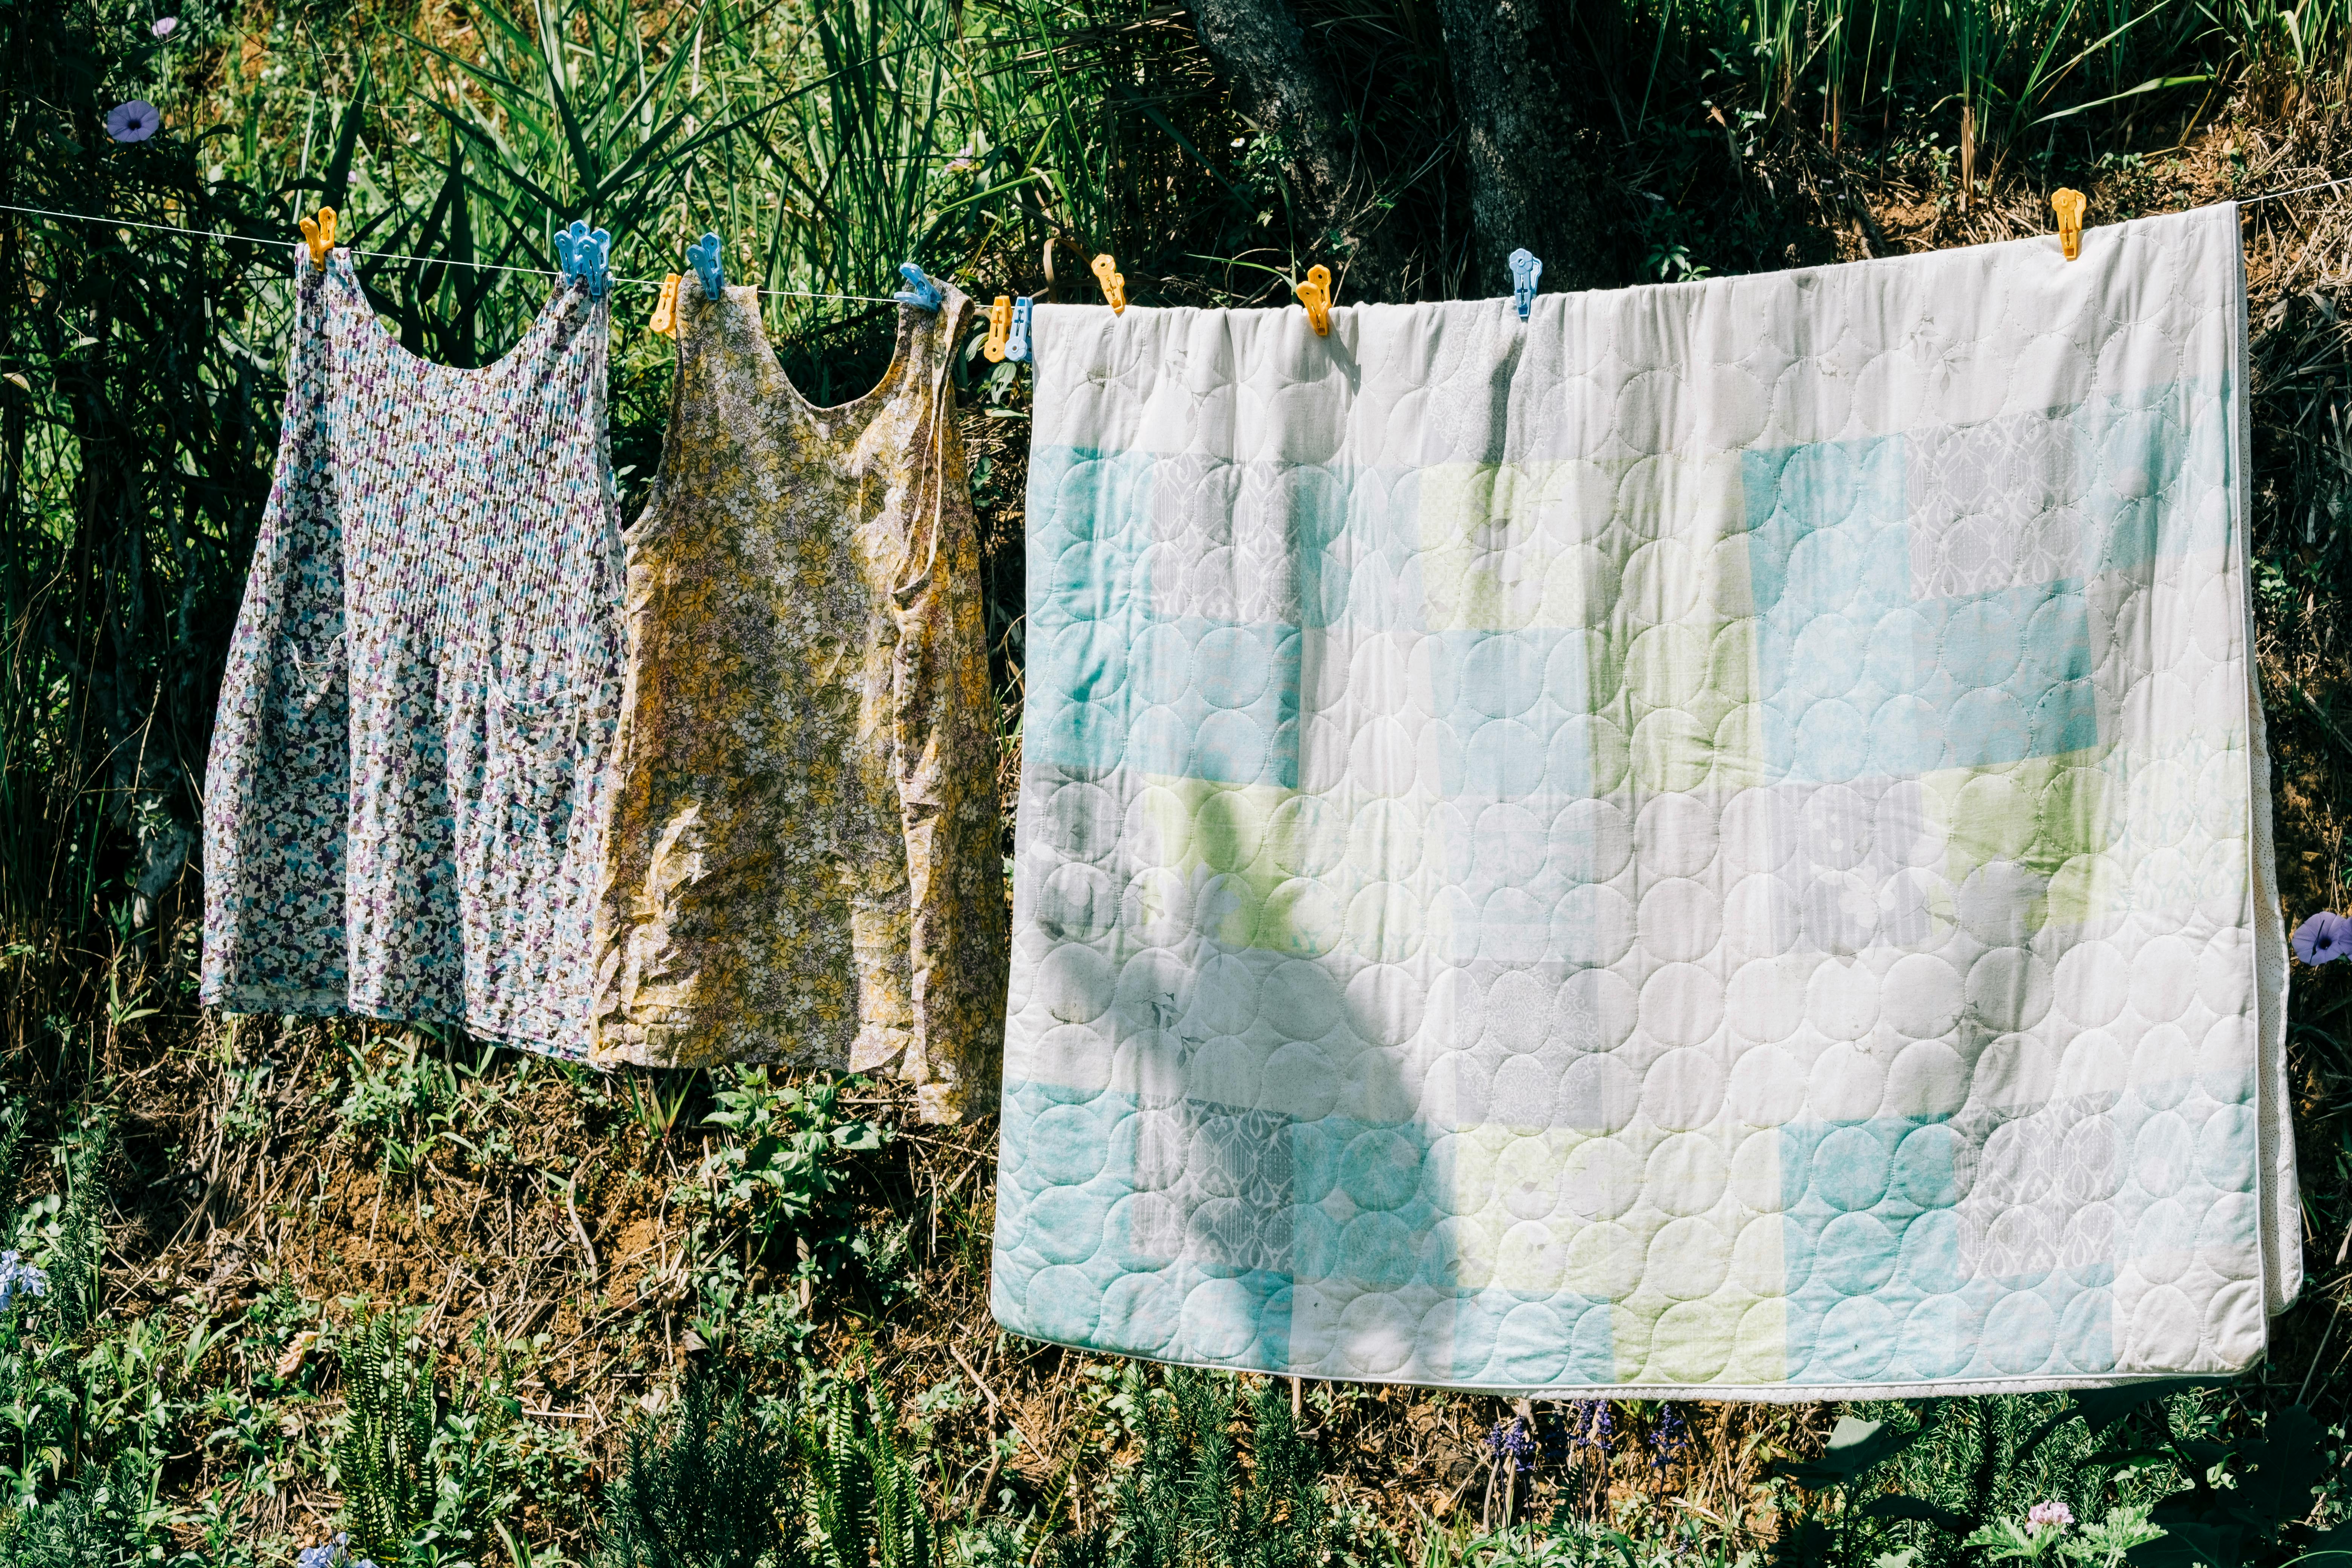 https://images.pexels.com/photos/17151146/pexels-photo-17151146/free-photo-of-laundry-air-drying-on-string.jpeg